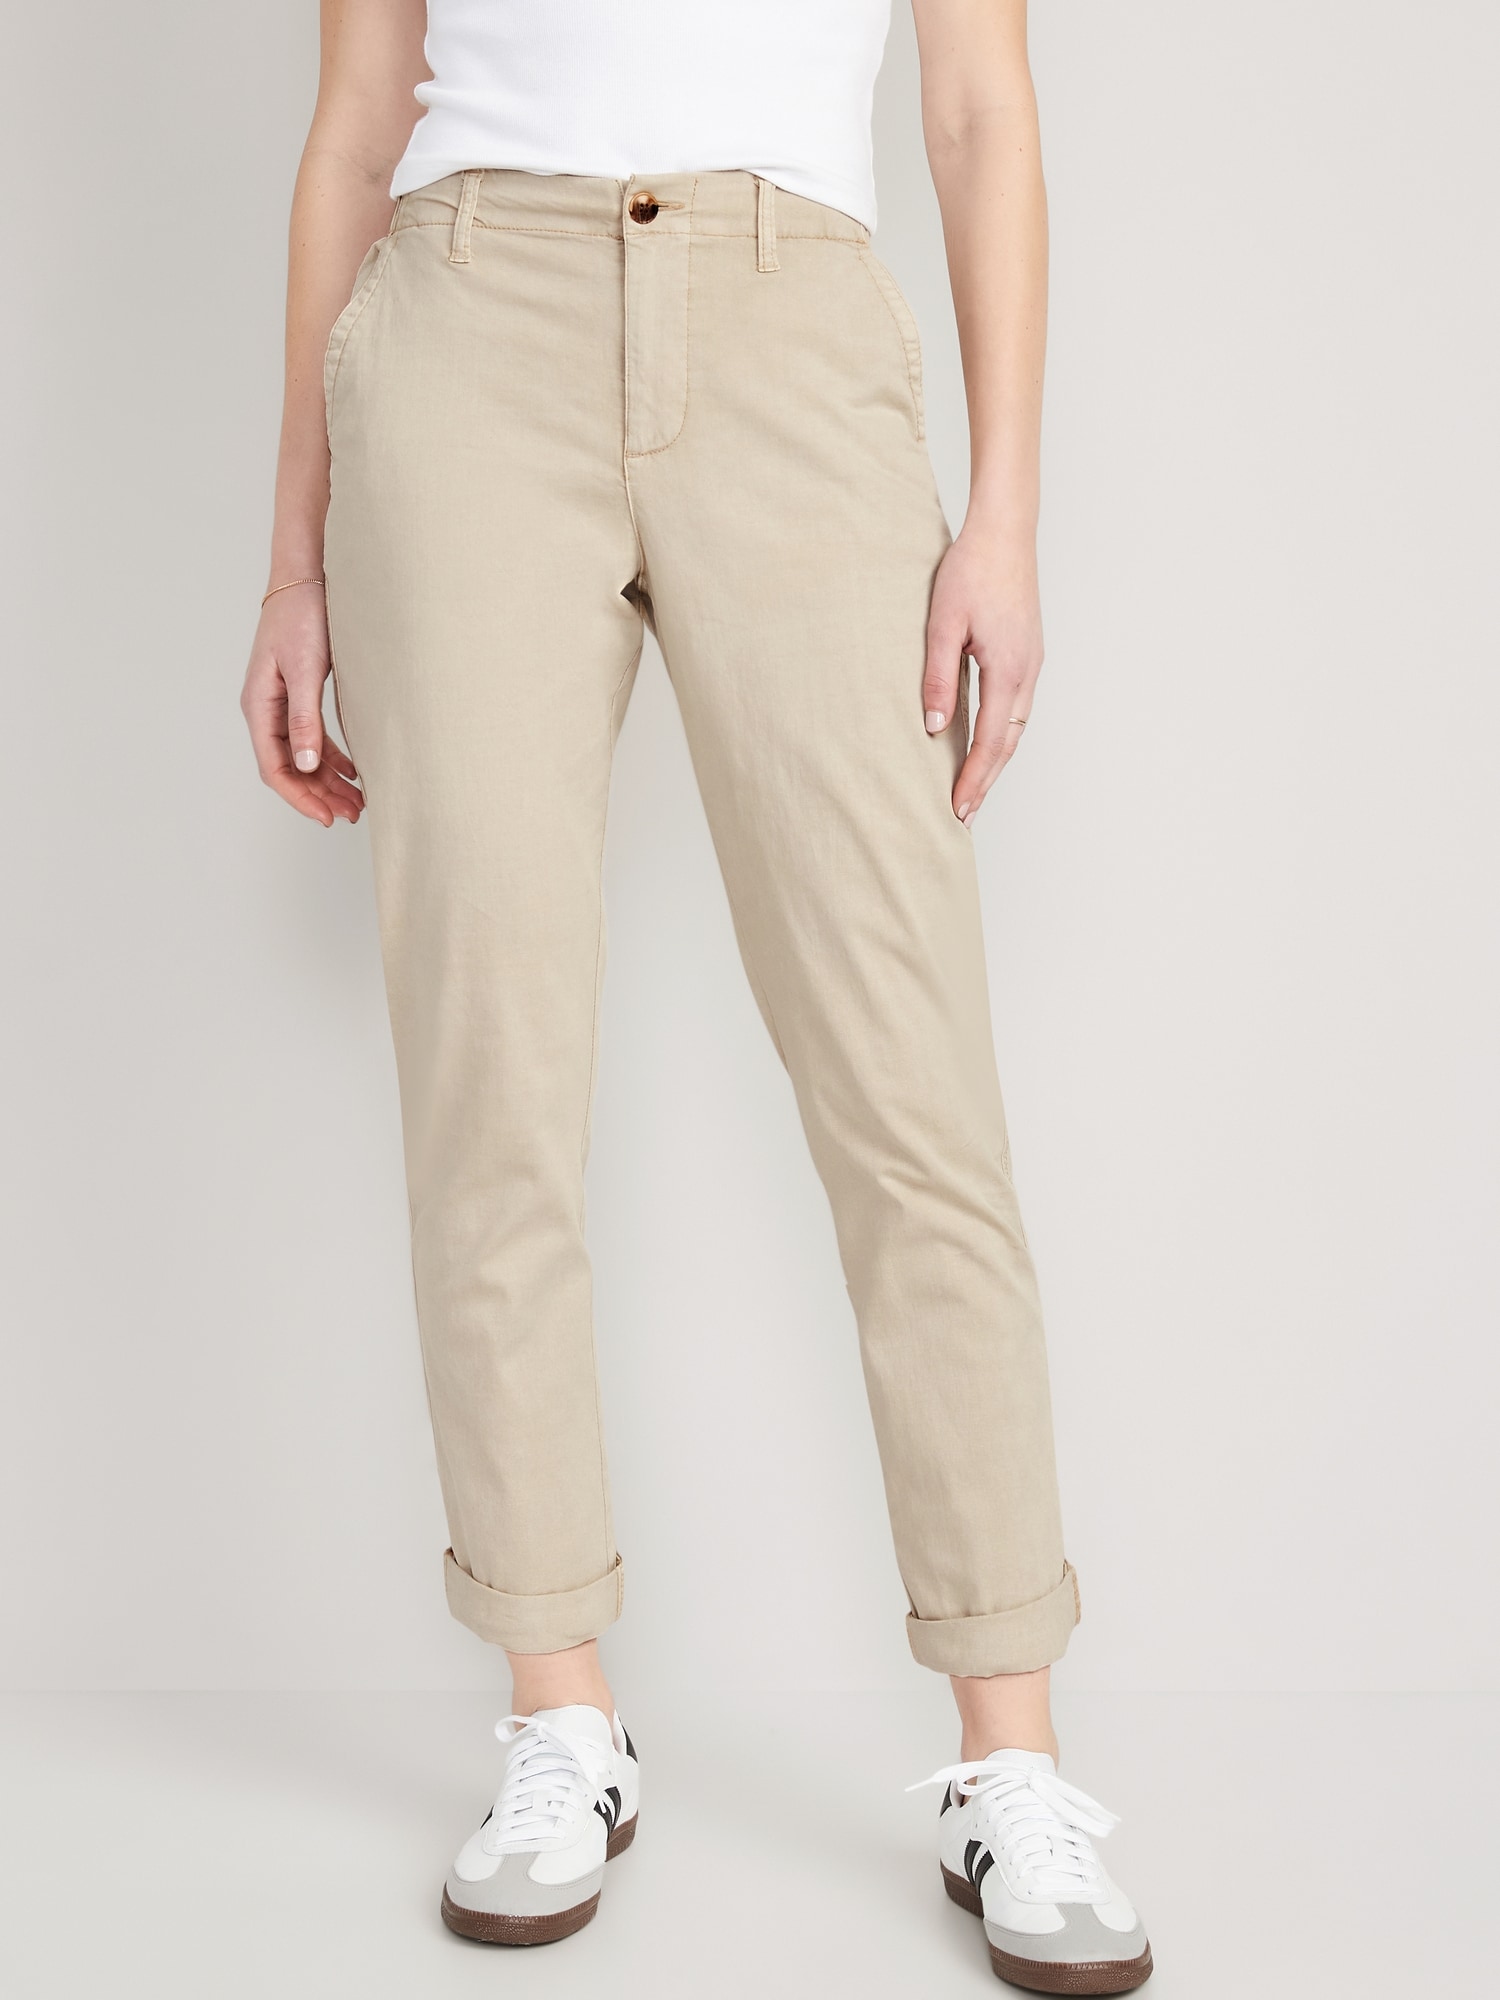 Old Navy High-Waisted OGC Chino Pants Review With Photos